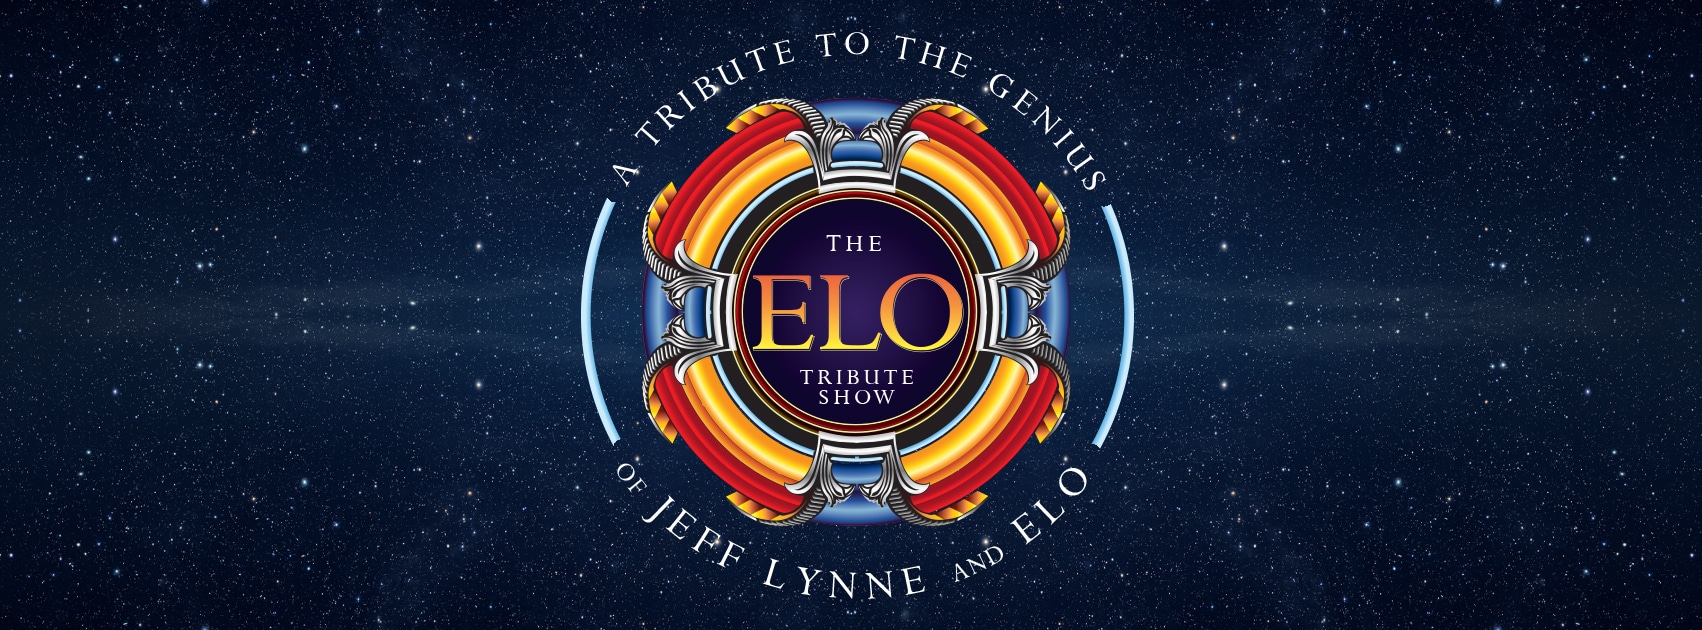 THE ELO SHOW – A Tribute to the Genius of Jeff Lynne